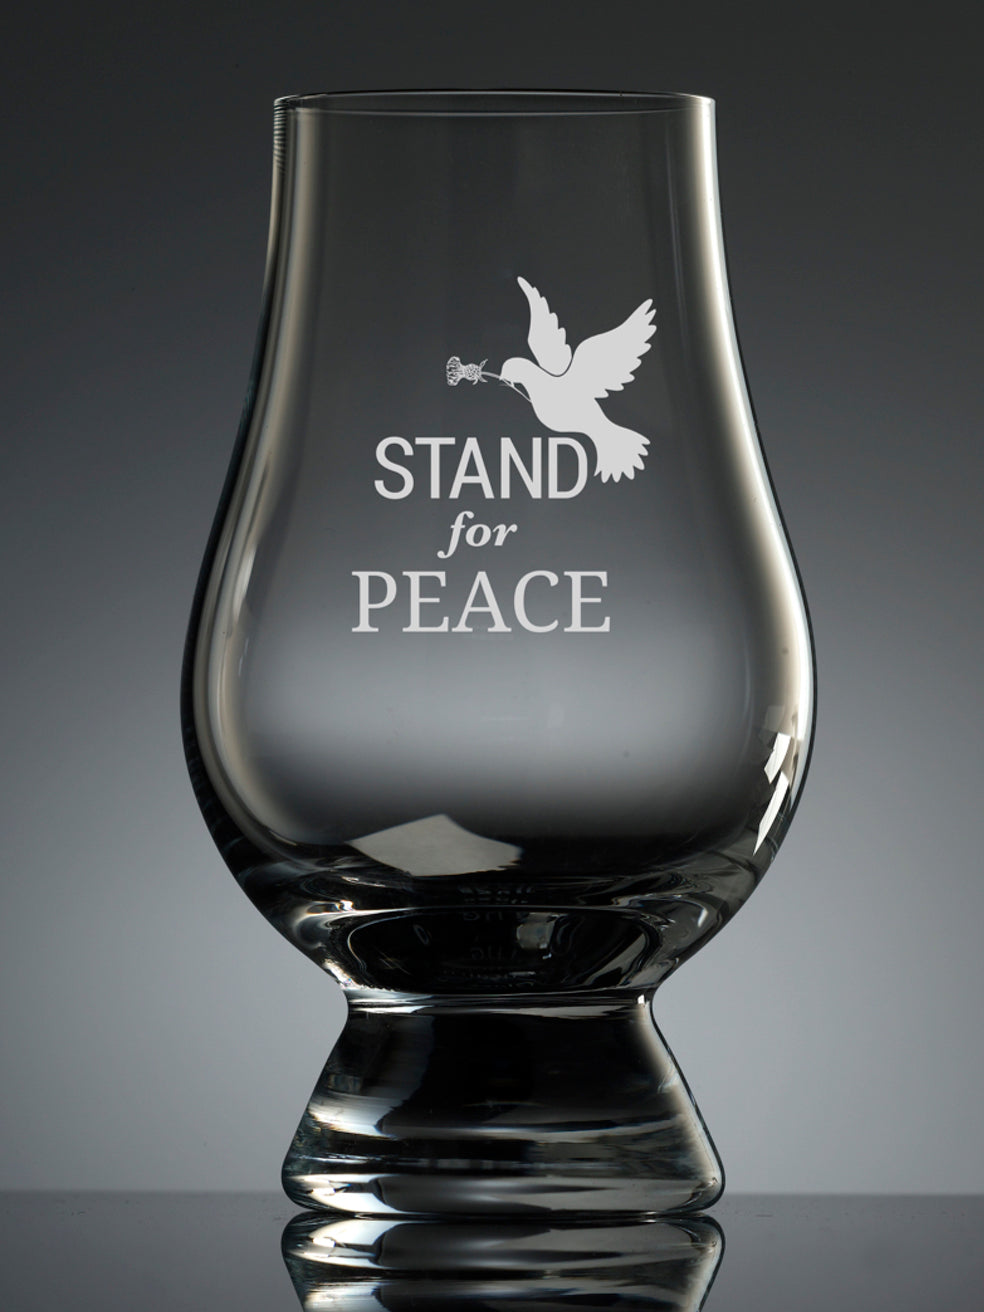 A whisky glass that gives back. All proceeds from the Glencairn Whisky Glass featuring a dove and the words "Stand for Peace" will be donated to the Red Cross' Ukrainian Humanitarian Crisis Appeal.